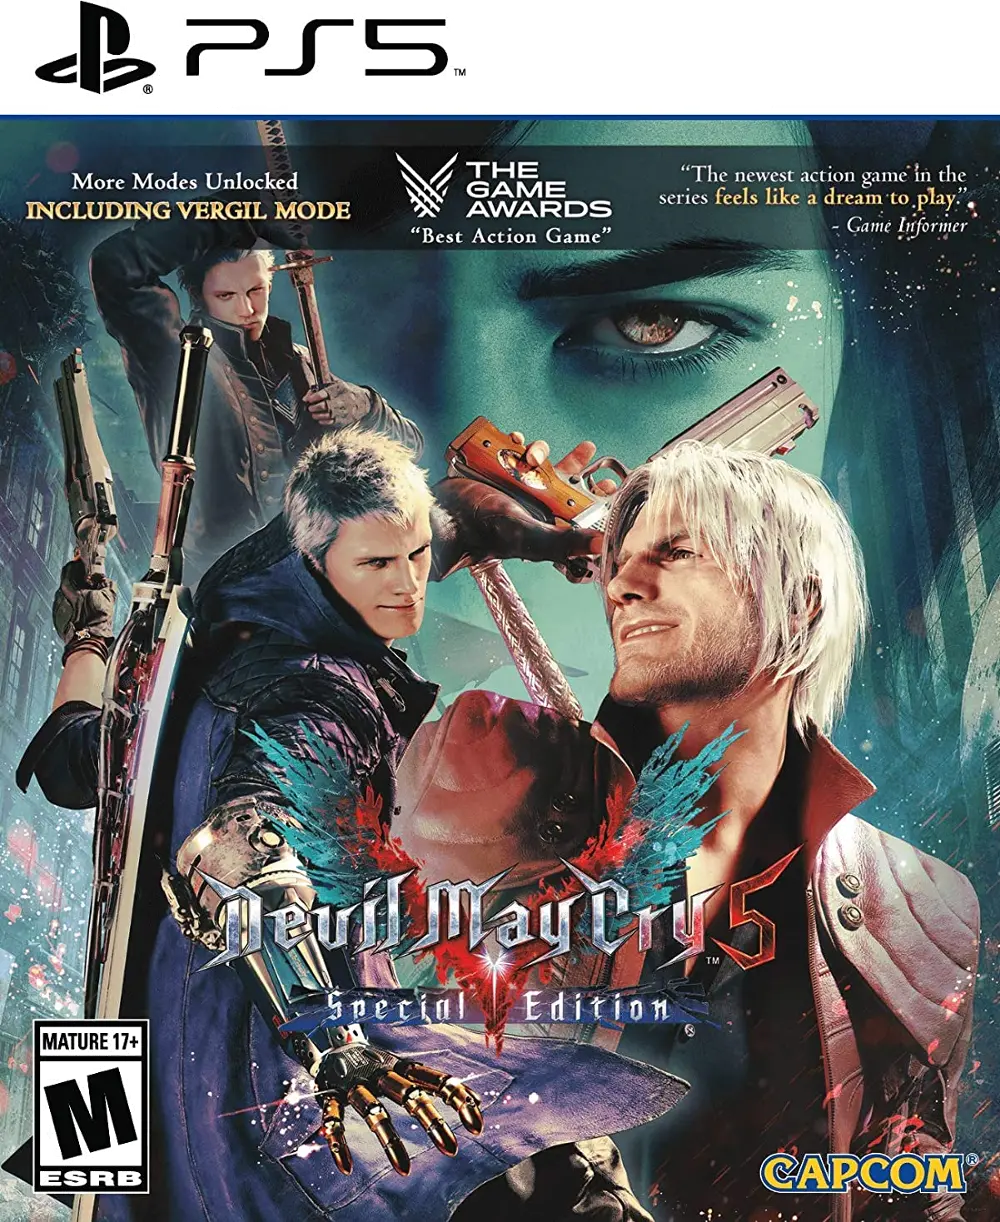 PS5/DEVIL_CRY5_SP_ED Devil May Cry 5 Special Edition - PS5-1